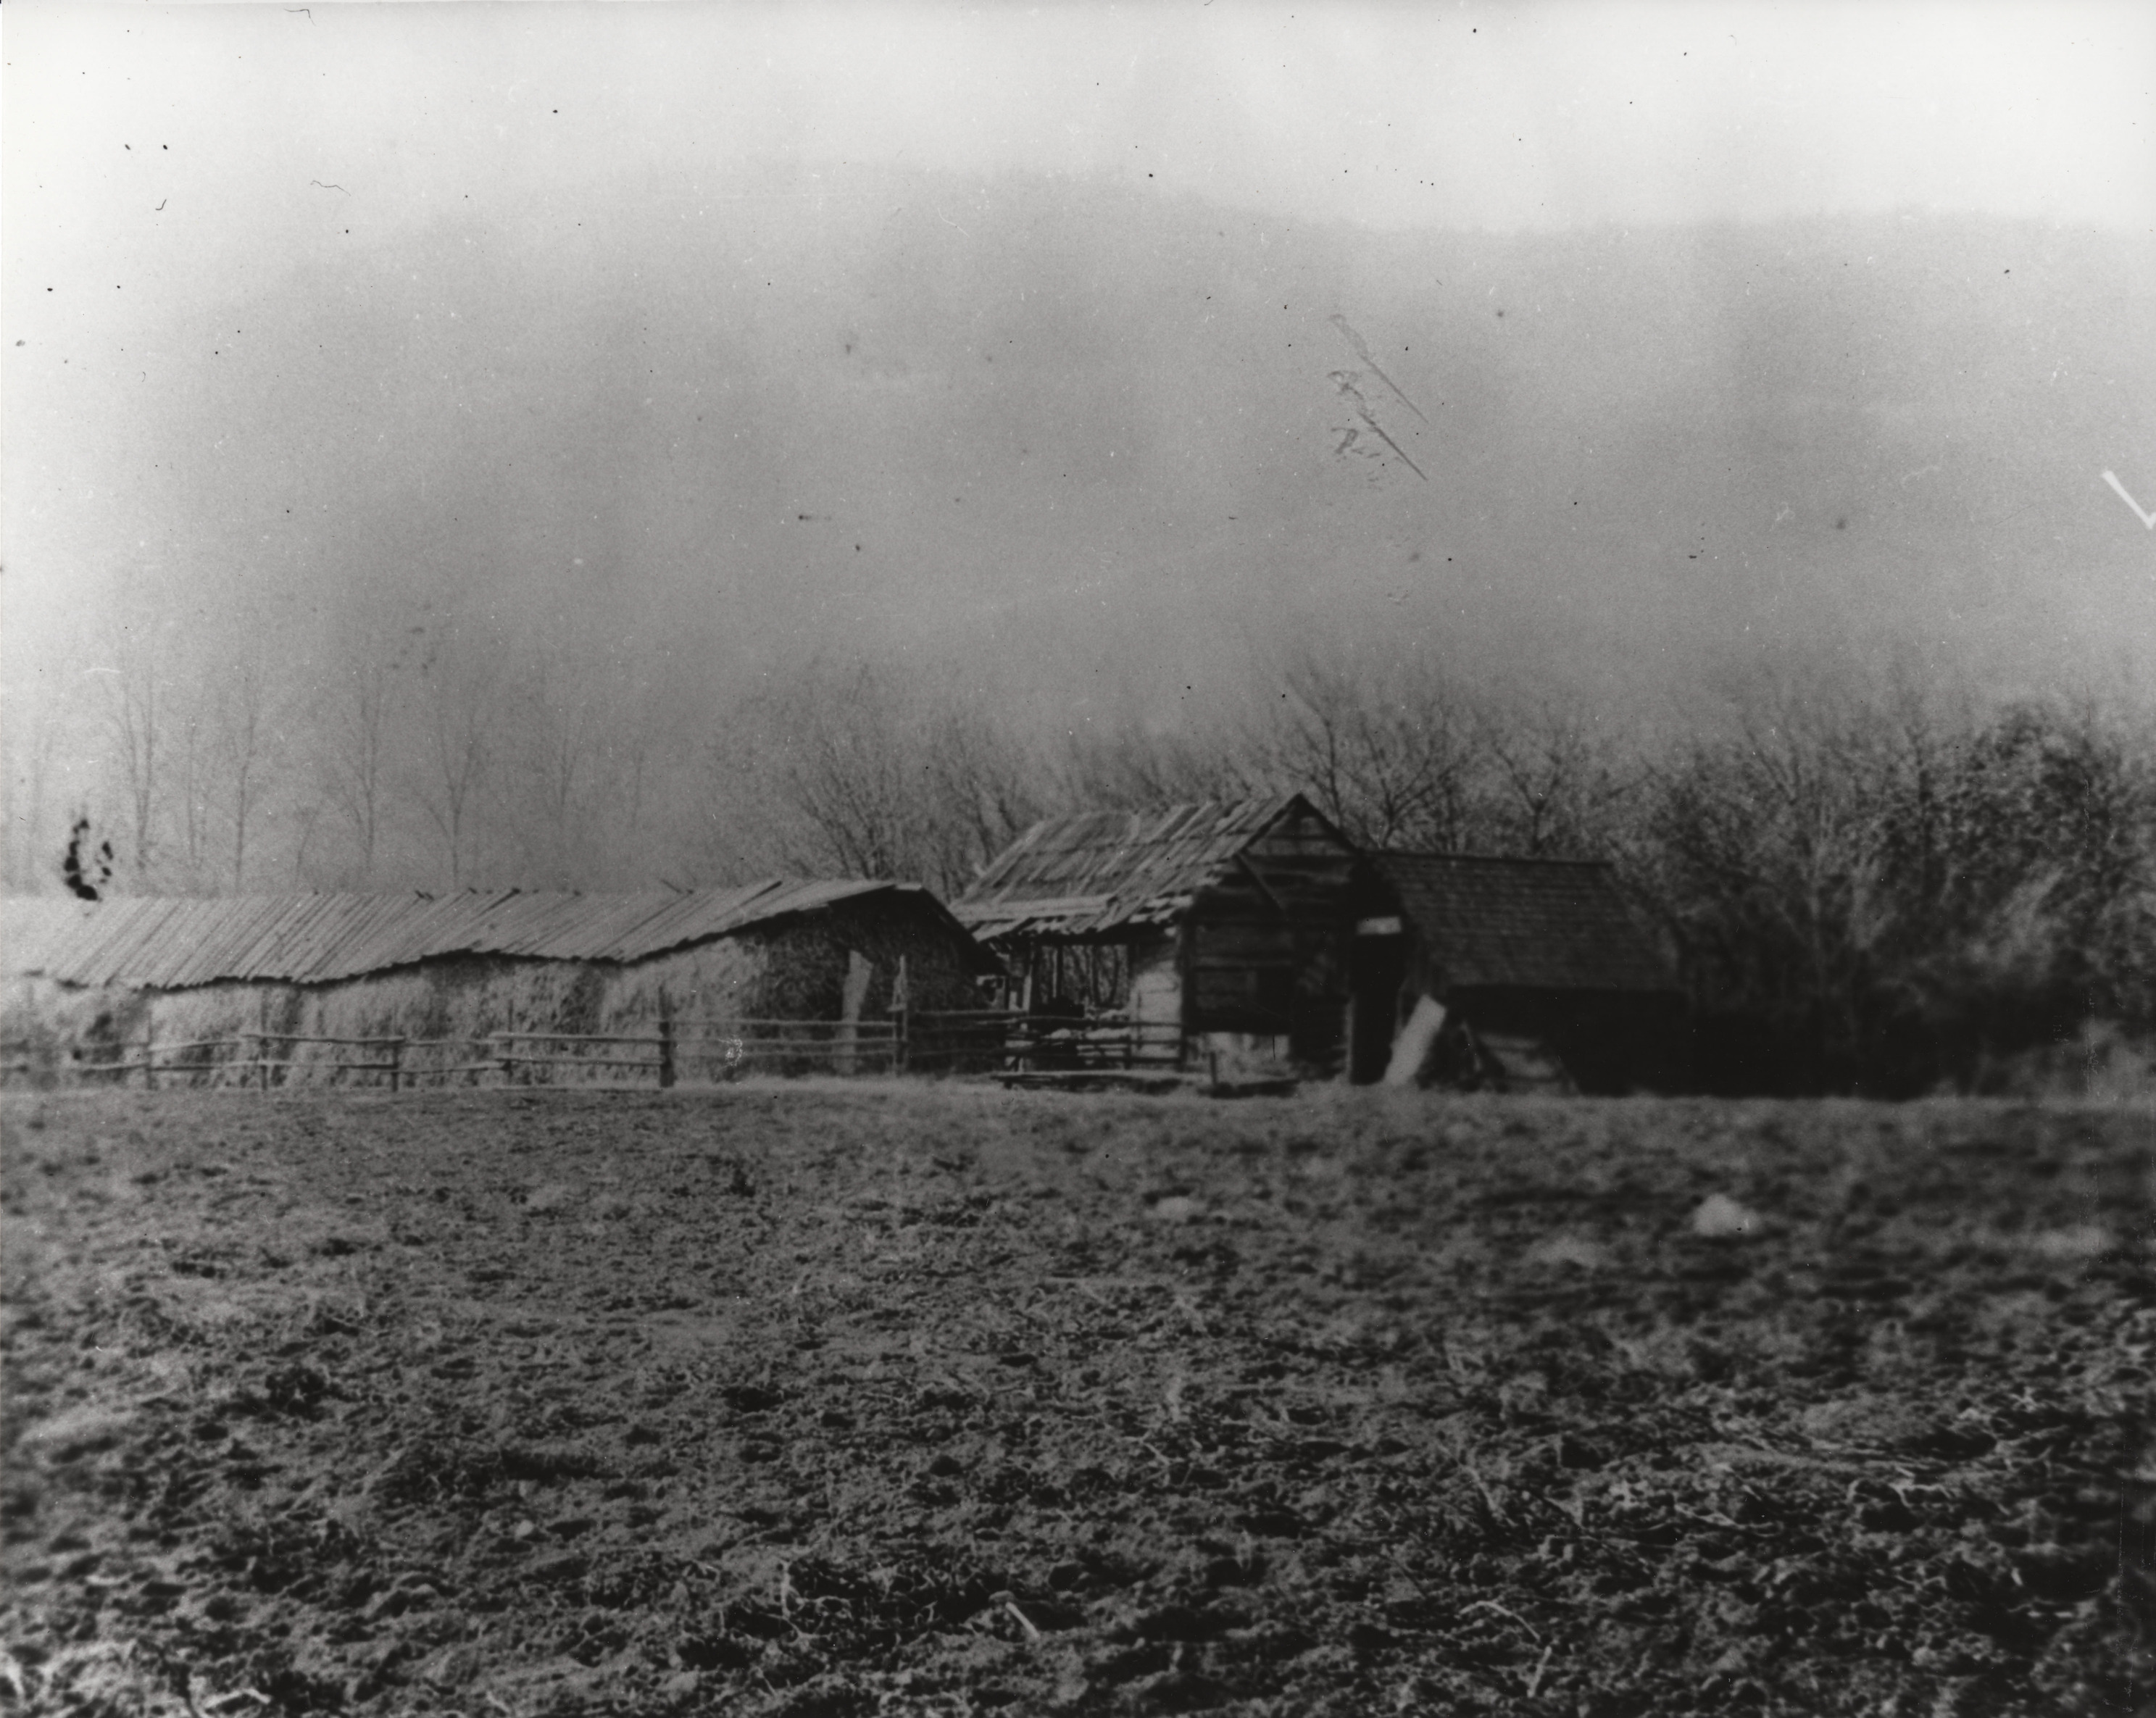 Black and white photograph of single story wooden structure at the edge of a field